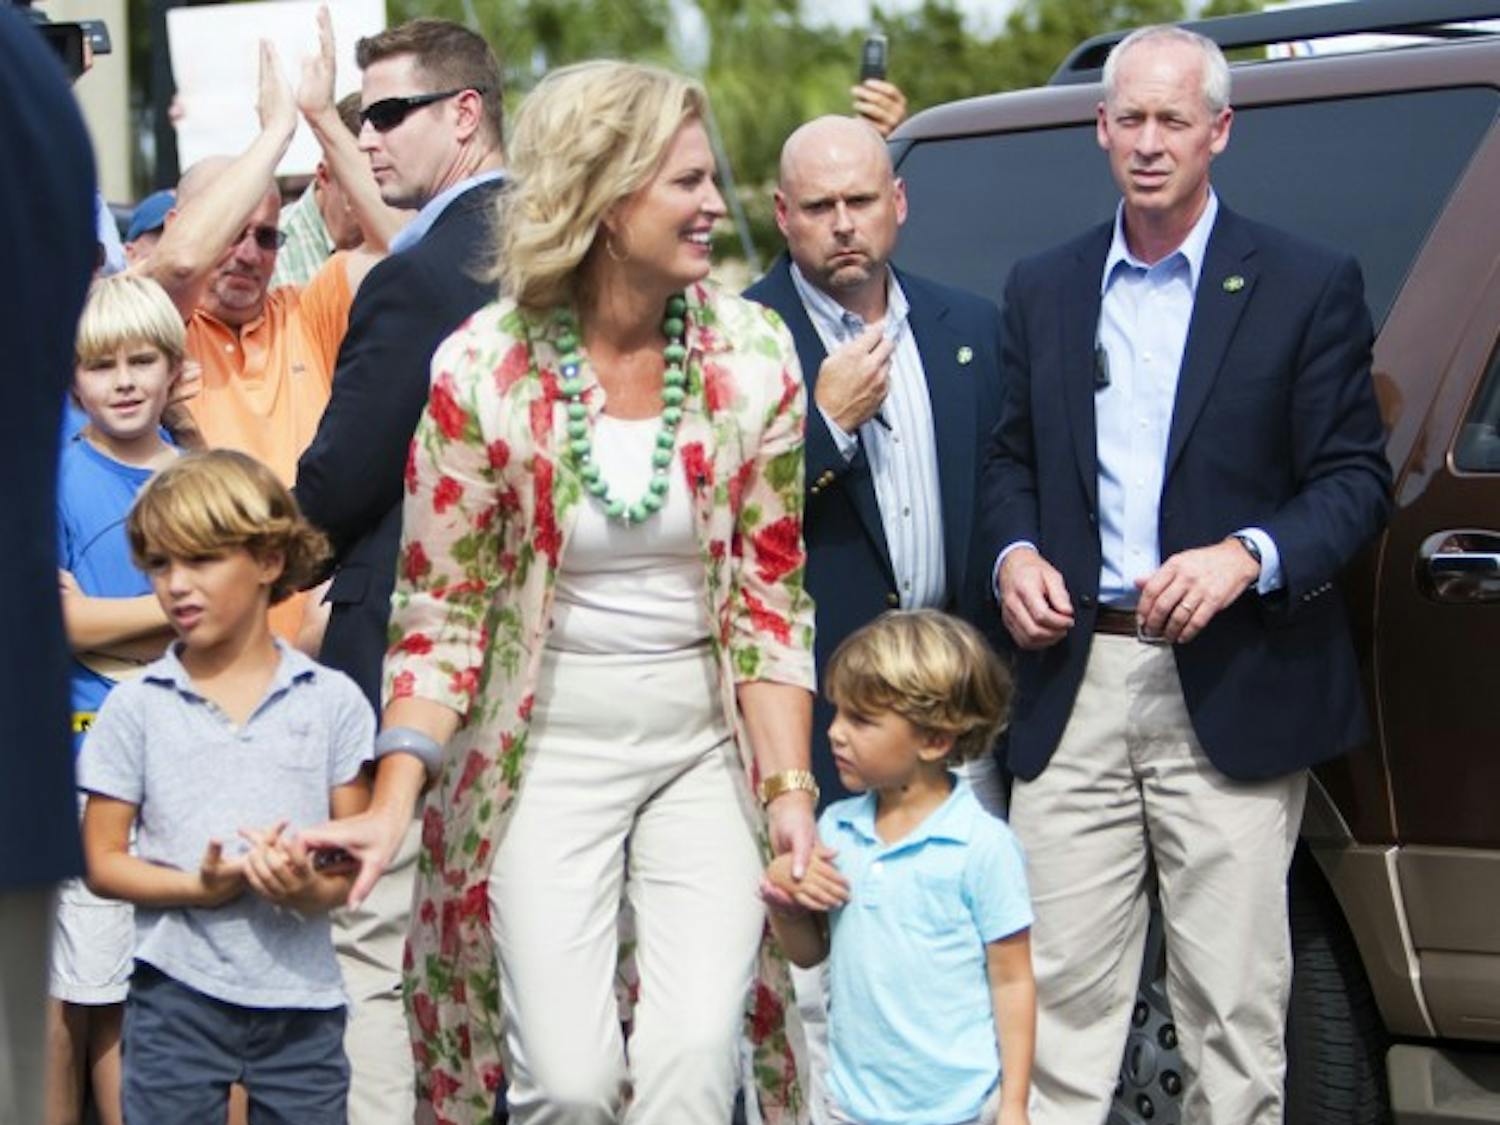 Ann Romney walks with two of her grandchildren after greeting supporters at David’s Real Pit BBQ located on Northeast 23rd Avenue on Thursday afternoon.